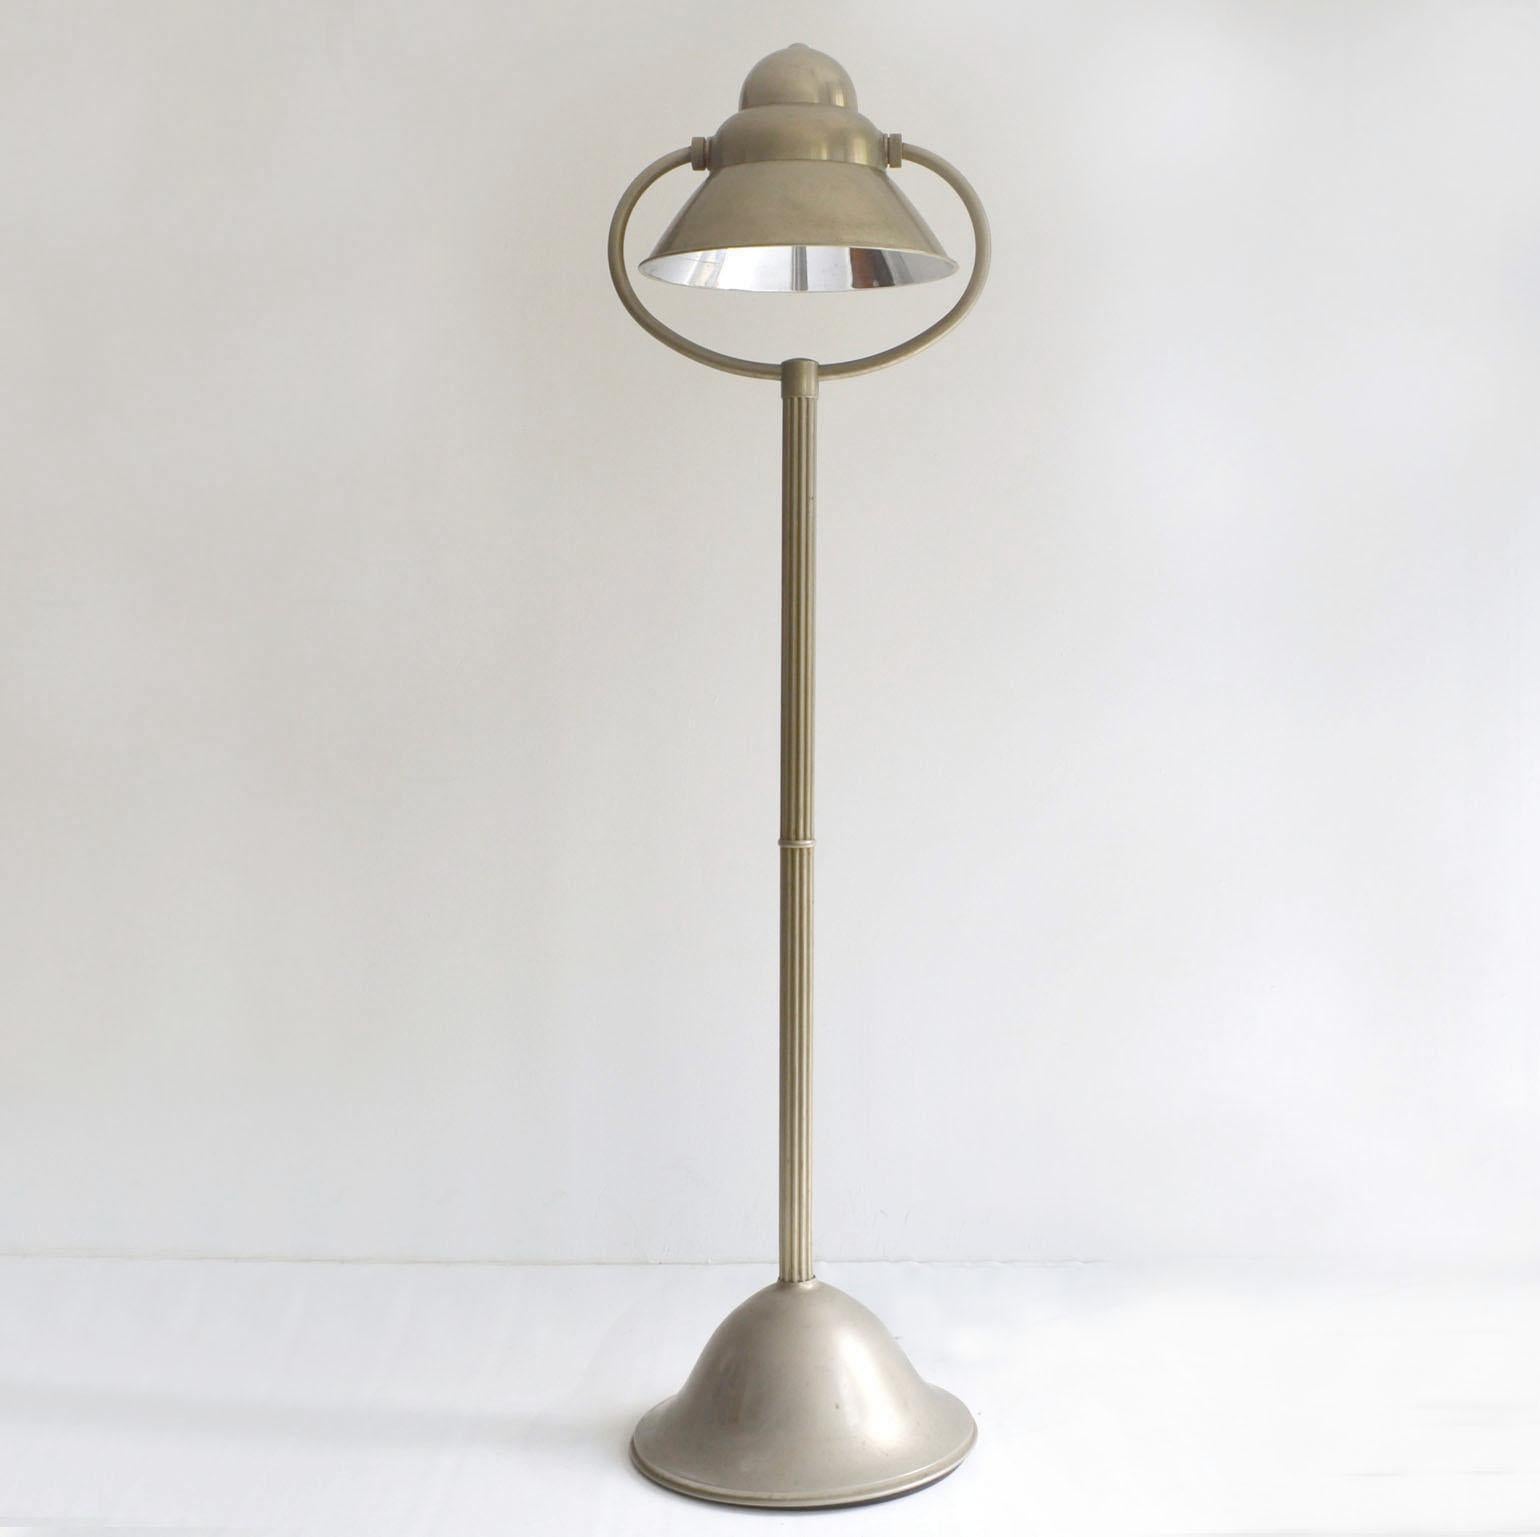 Art Deco Floor Lamp 1920's with Adjustable Shade in Nickel Attributed to Gispen  For Sale 5